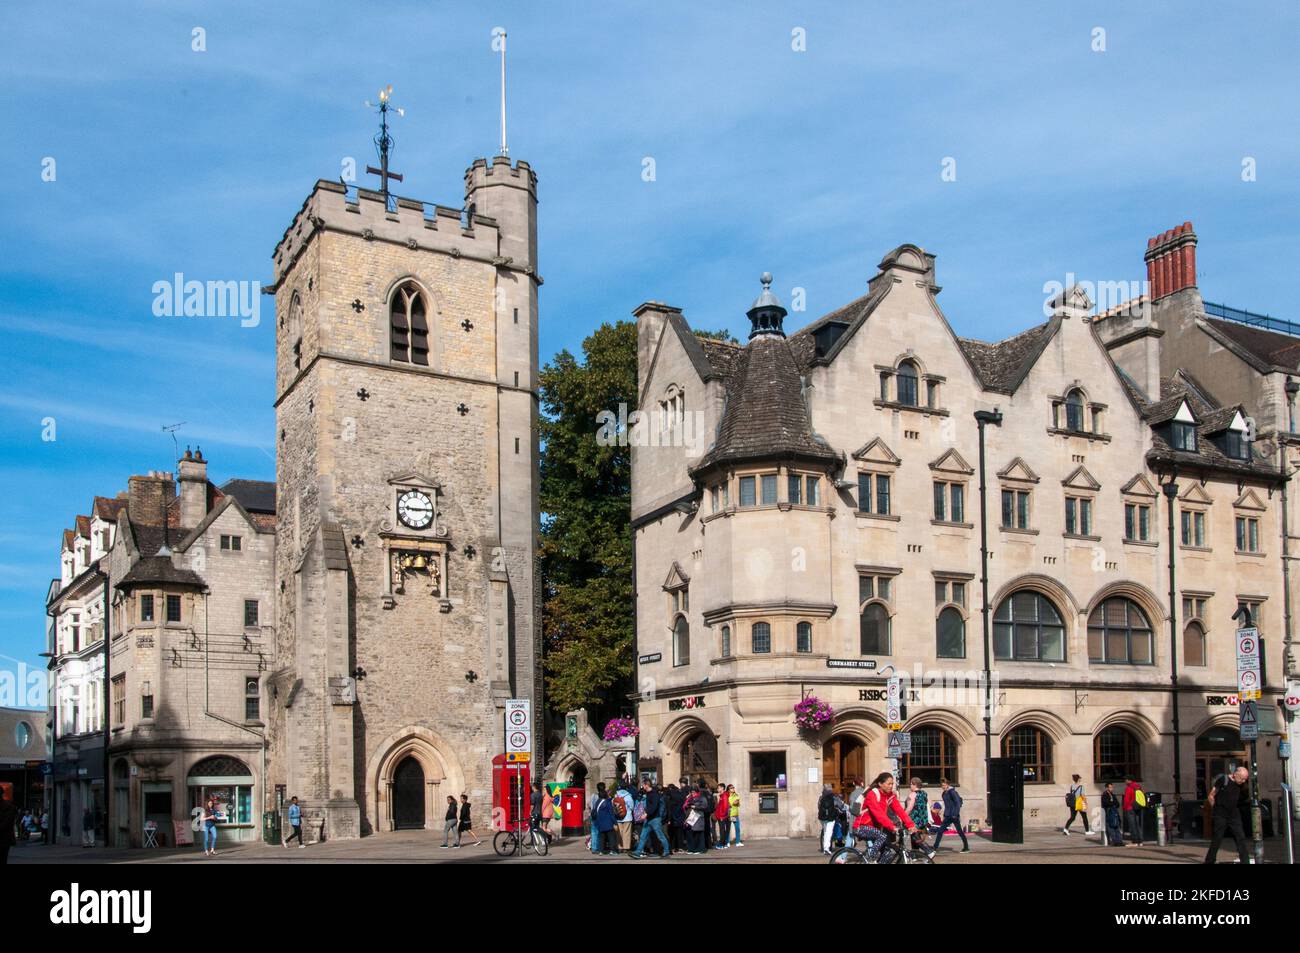 Carfax or St Martins Tower stands at a crossroads in the centre of the university city of Oxford, England Stock Photo